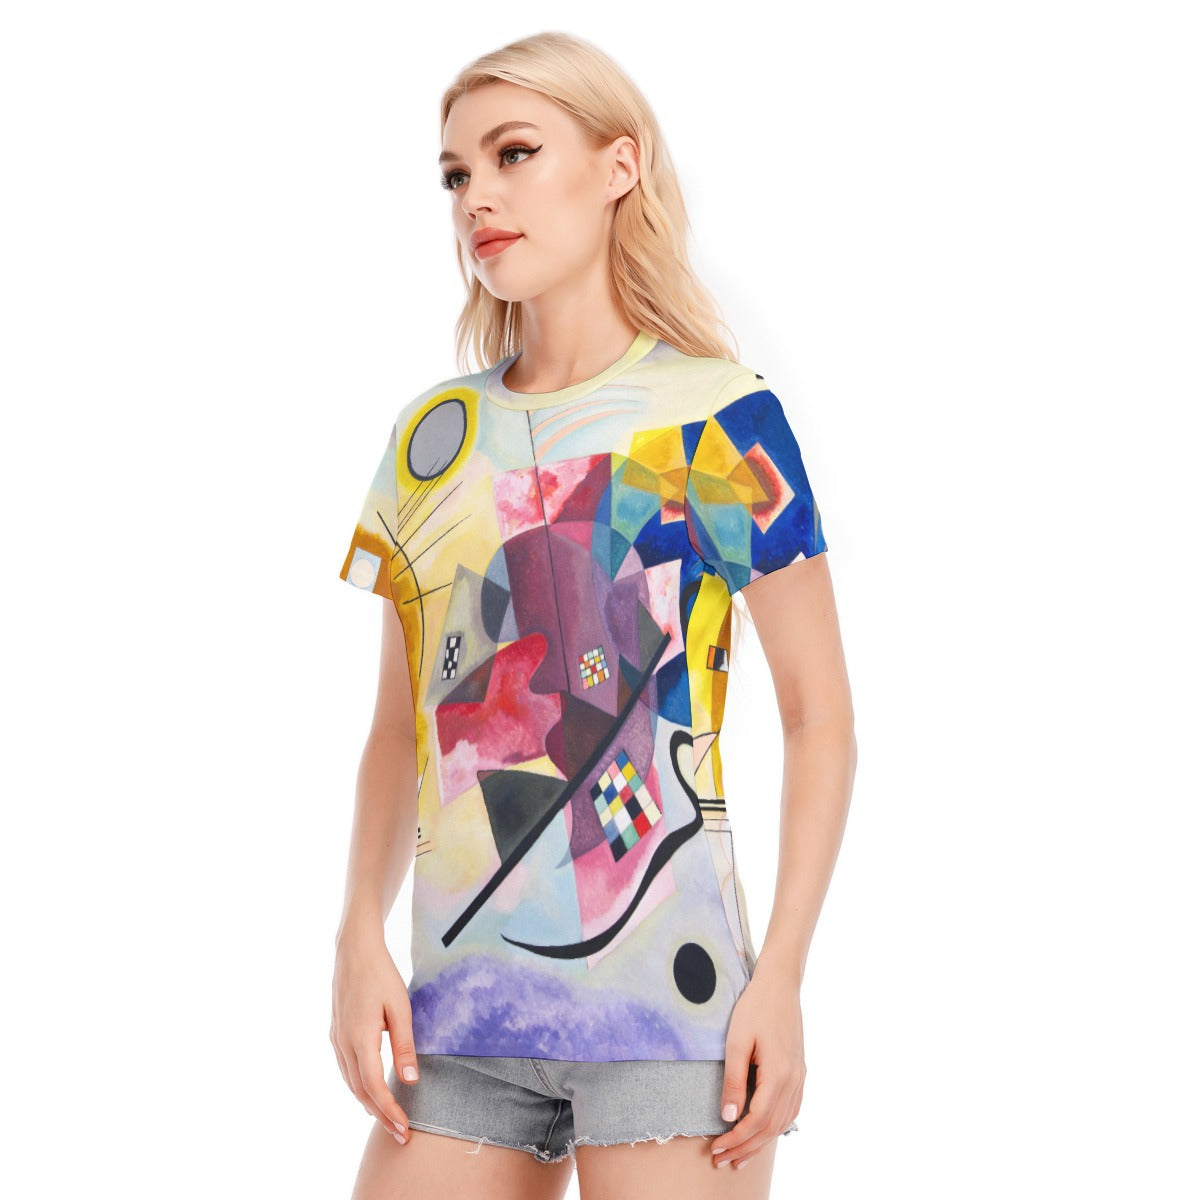 Eye-catching Tee for Art Enthusiasts